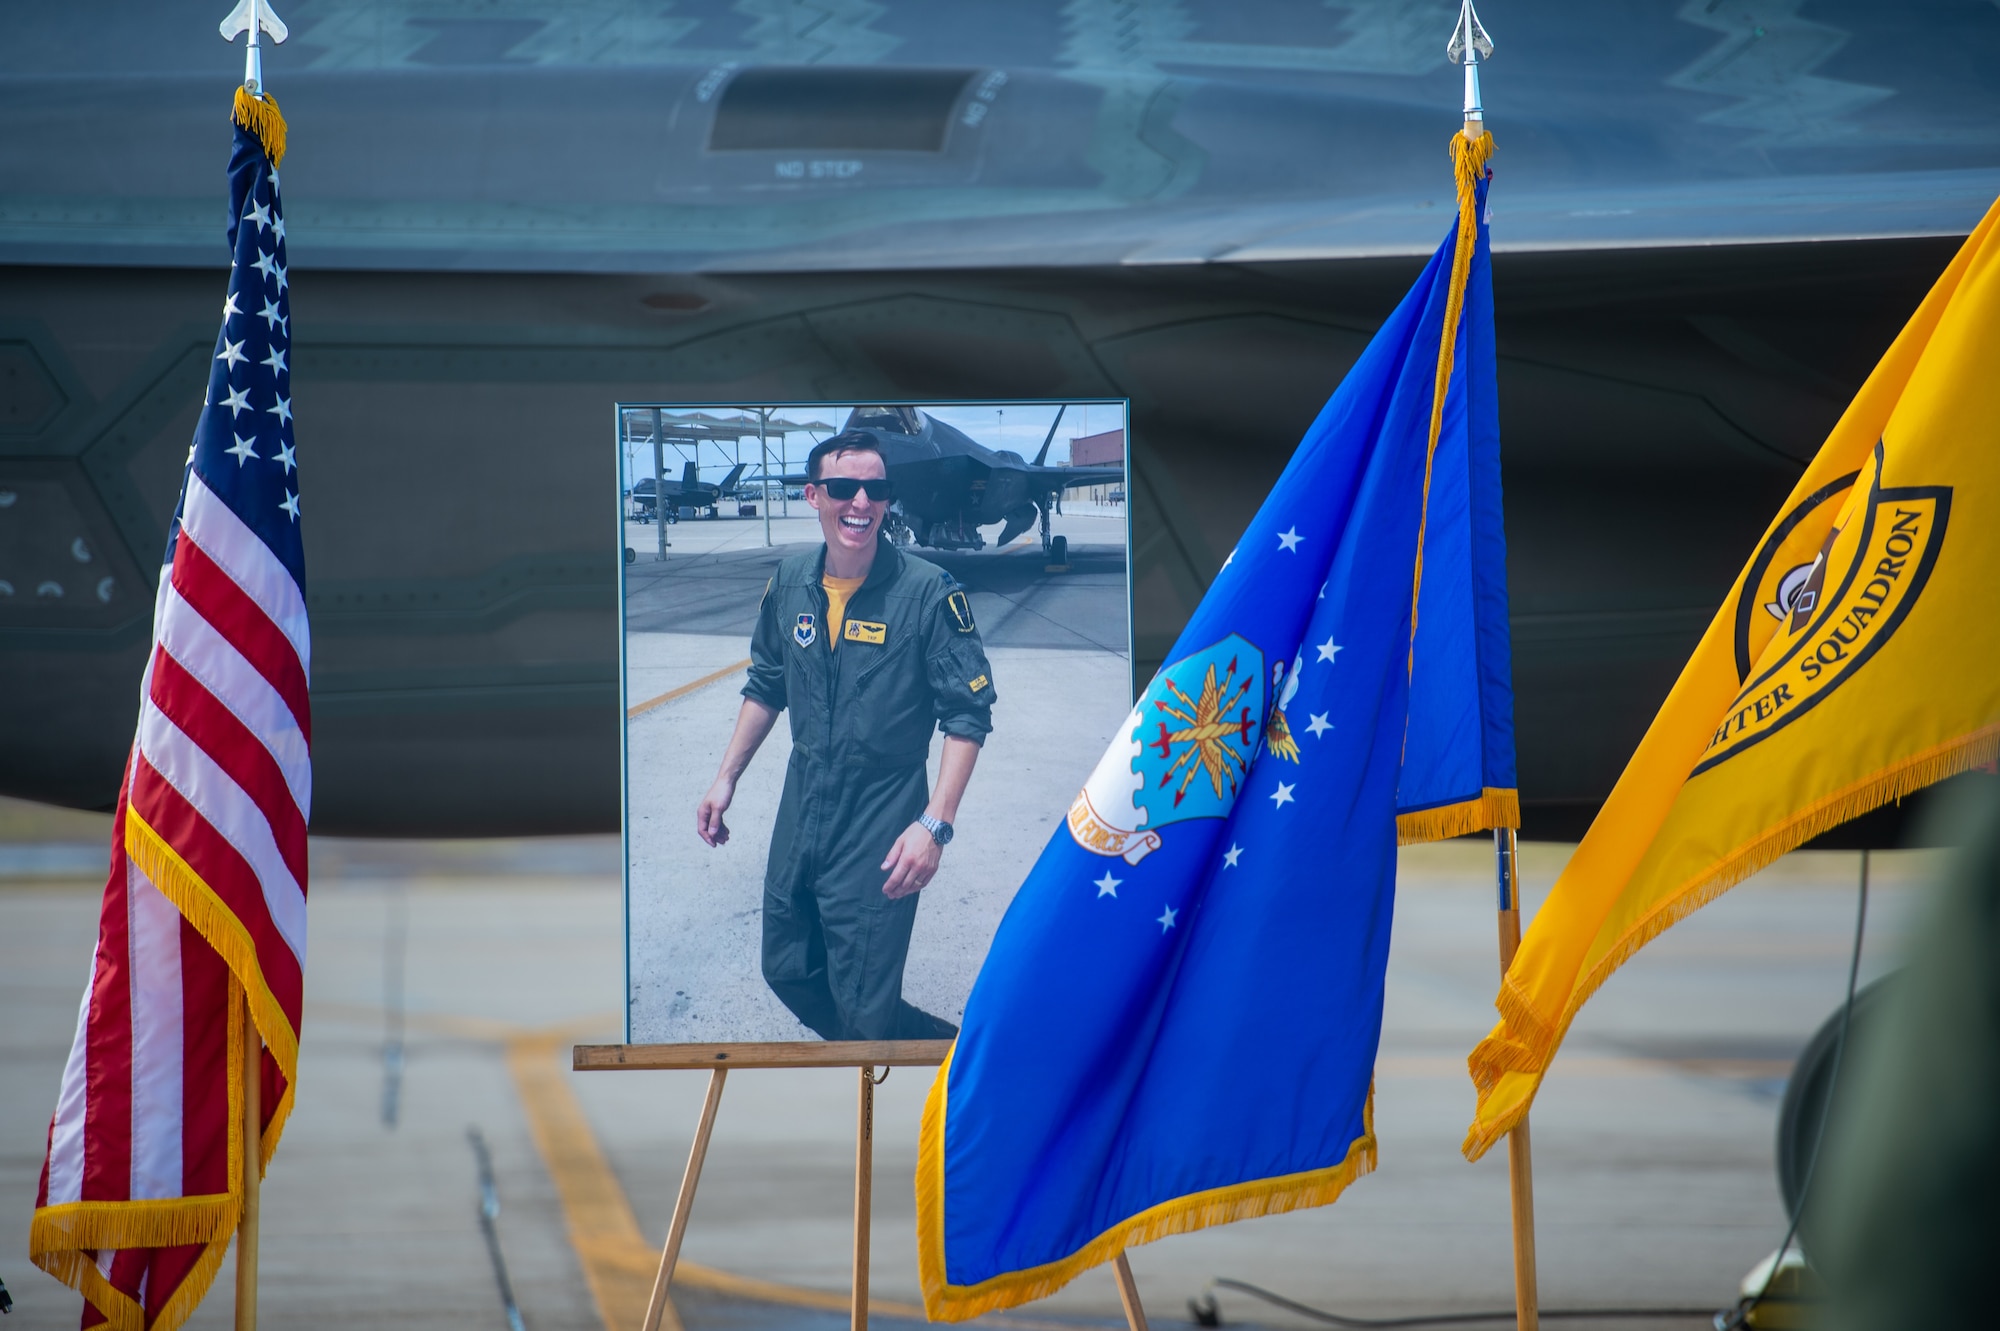 A picture of Capt. Stephen “Trip” Grace is displayed during a memorial service Dec. 7, 2018, at Luke Air Force Base, Ariz. Capt. Grace was assigned to the 61st Fighter Squadron and was recognized as the Company Grade Officer of the Year in 2018. (U.S. Air Force photo by Senior Airman Alexander Cook)